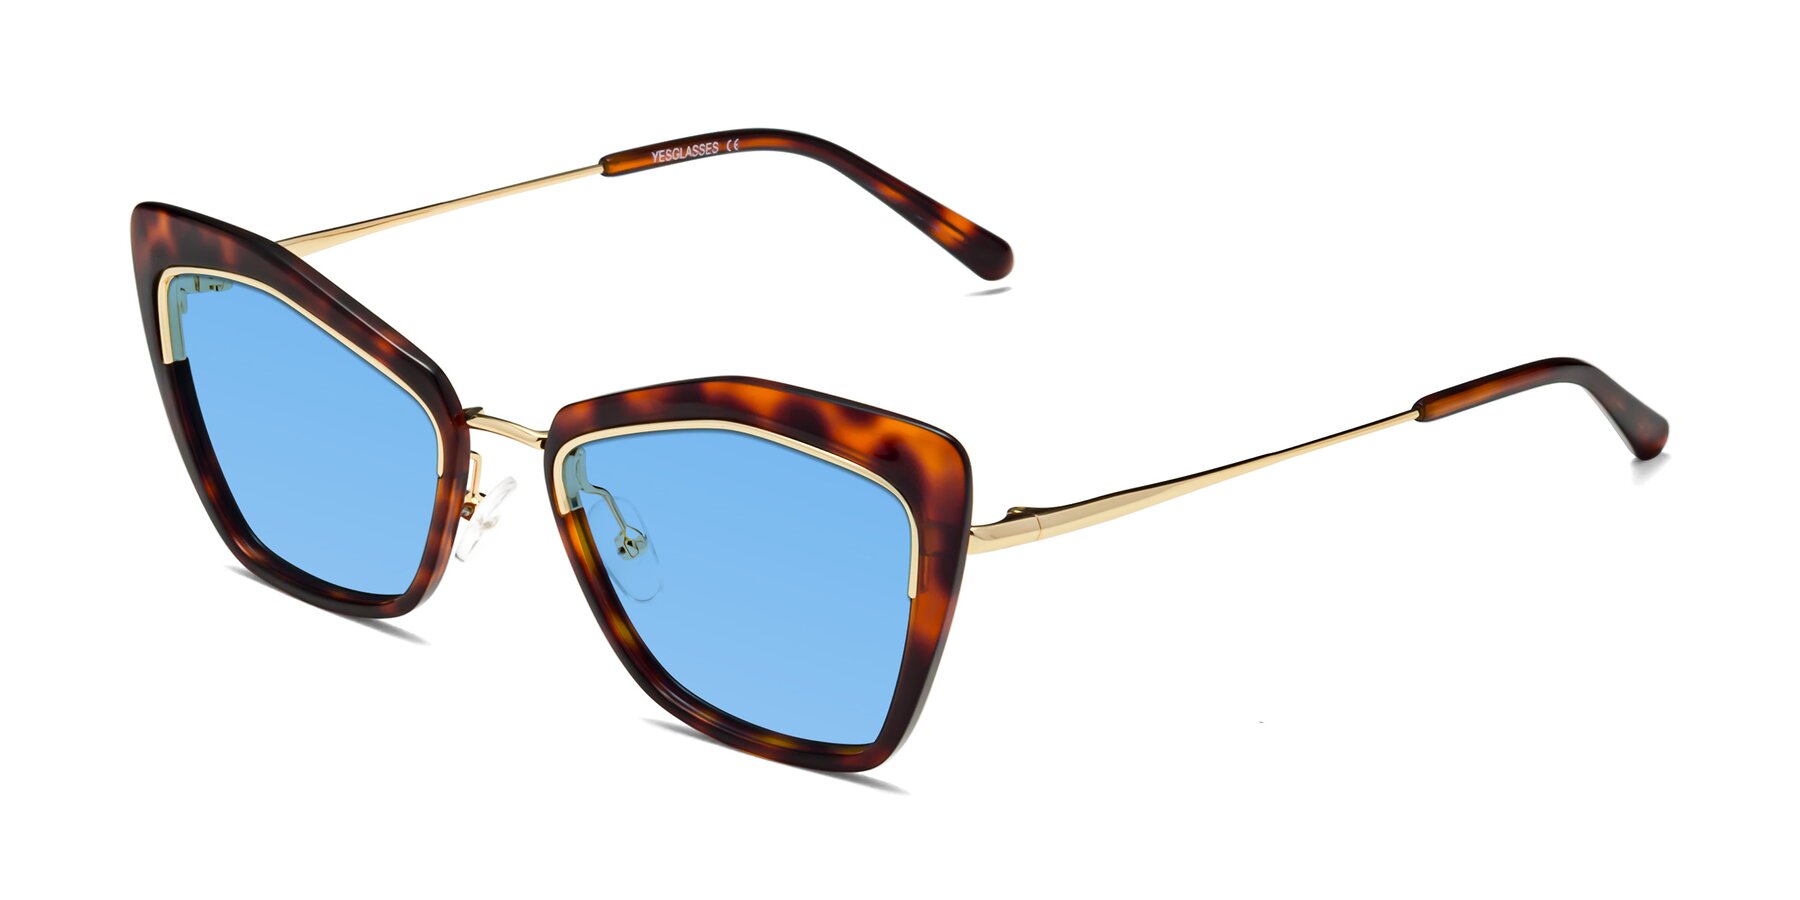 Angle of Lasso in Light Tortoise with Medium Blue Tinted Lenses